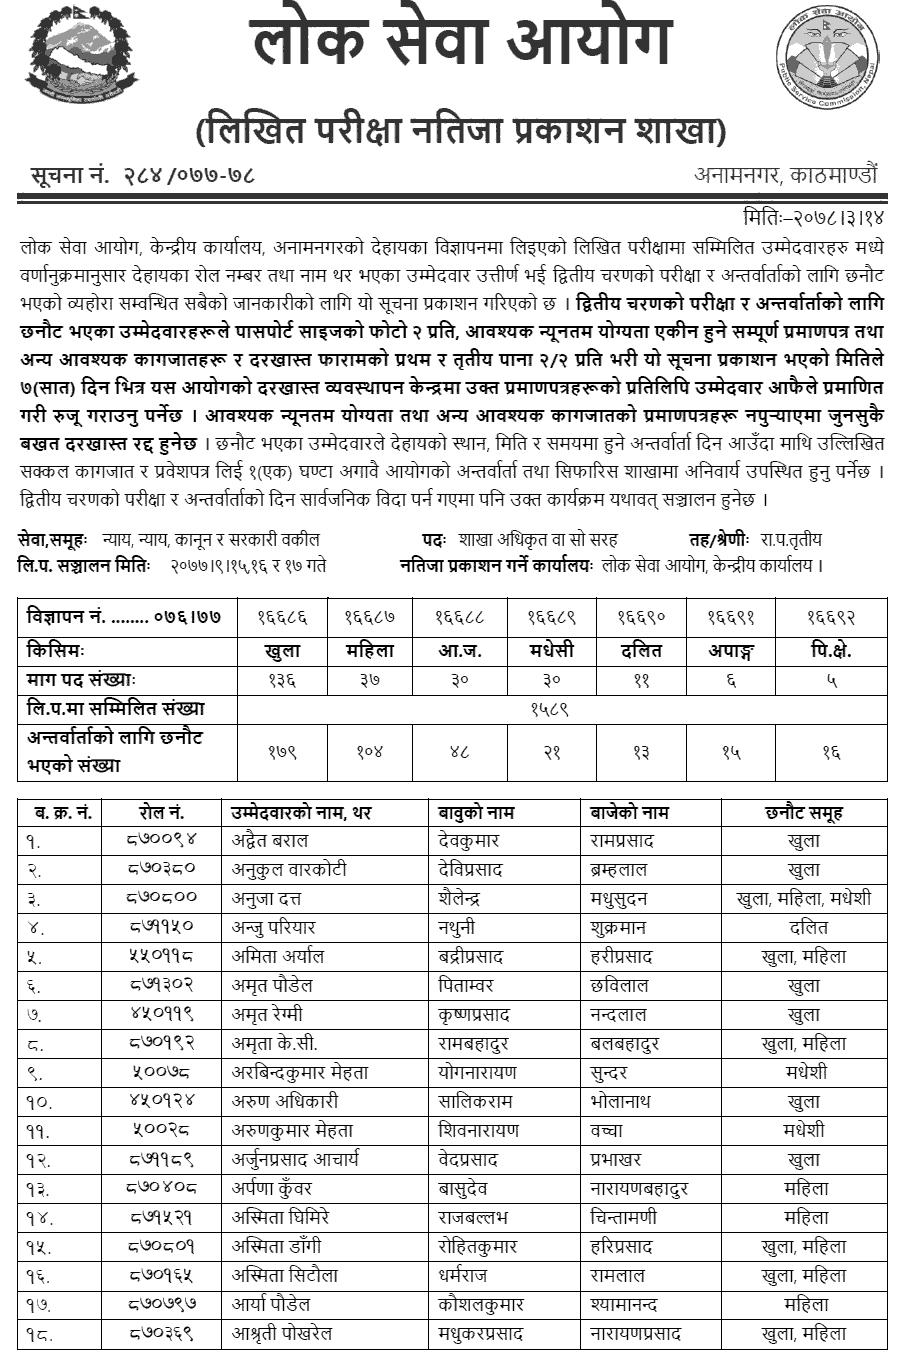 Lok Sewa Aayog Published Written Exam Result of Section Officer (First Paper)